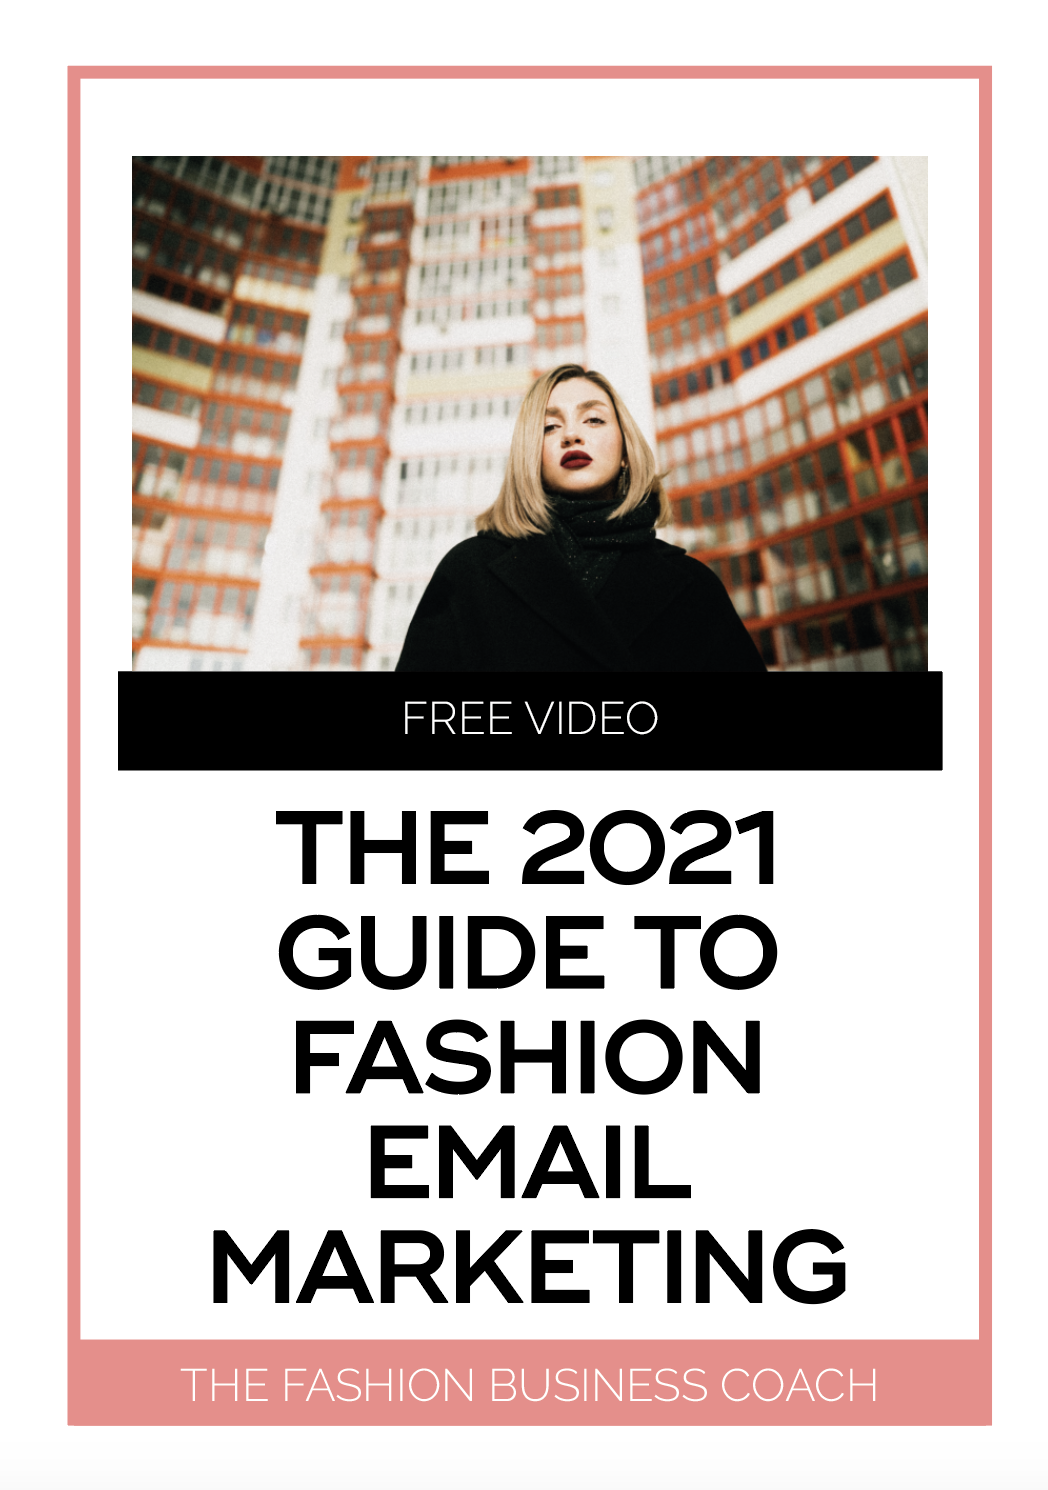 The 2021 Guide to Fashion Email Marketing 4.png